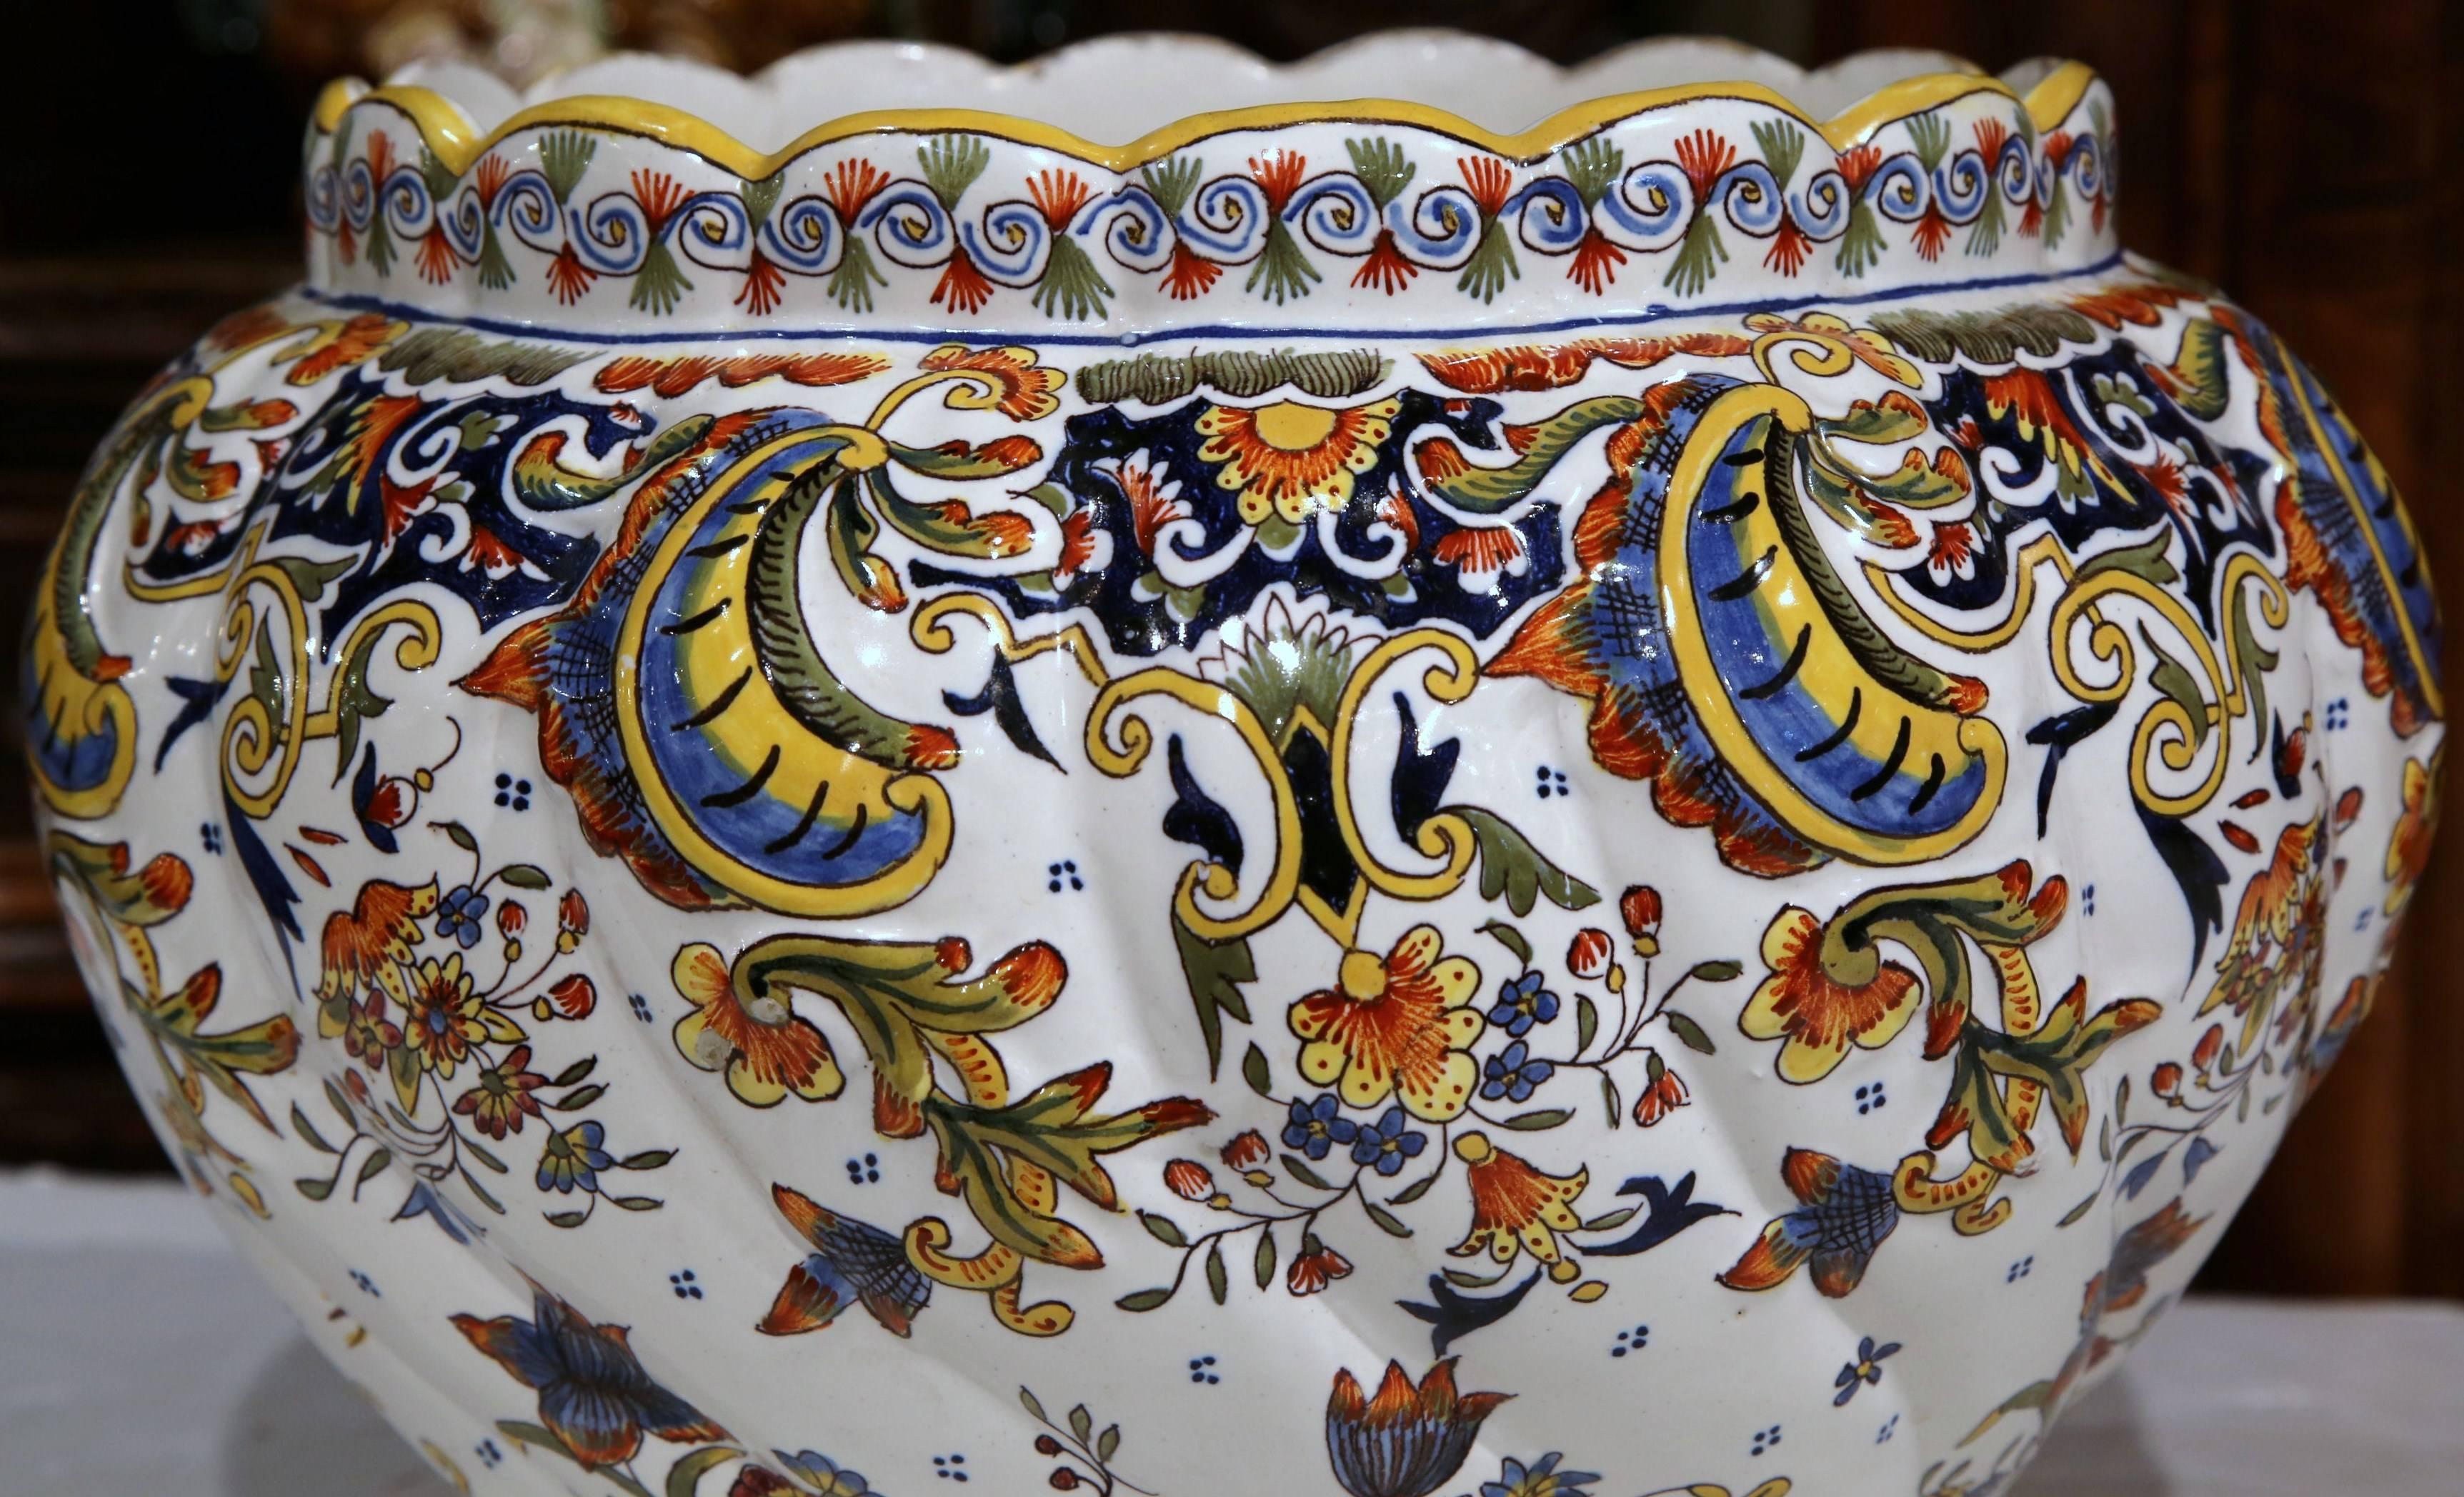 This large colorful, hand-painted jardinière was sculpted in Rouen, France, circa 1920. This ceramic antique planter has a curly, scalloped shape at the rim, and sits on eight small feet. The traditional pot features floral motifs in a blue, yellow,